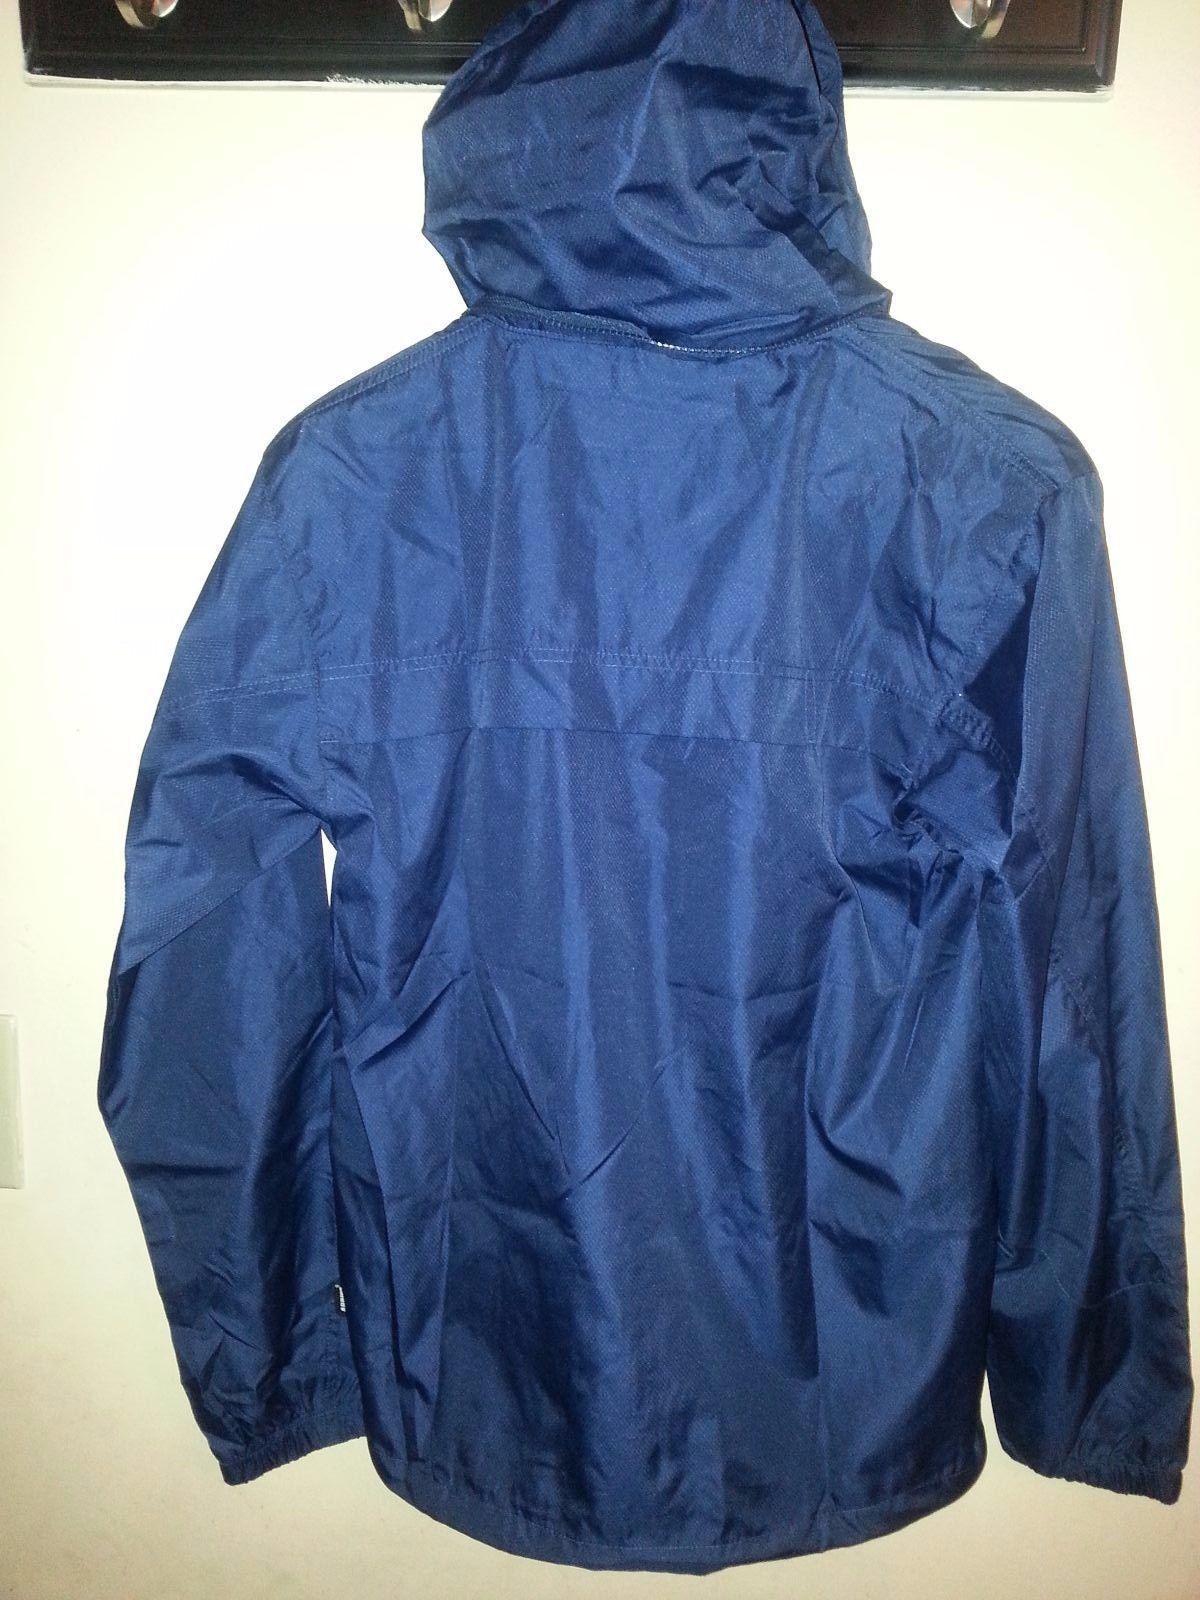 LADIES HOODED WINDBREAKER FULL ZIP/TWO POCKETS WITH BUTTON/NAVY COLOR ...